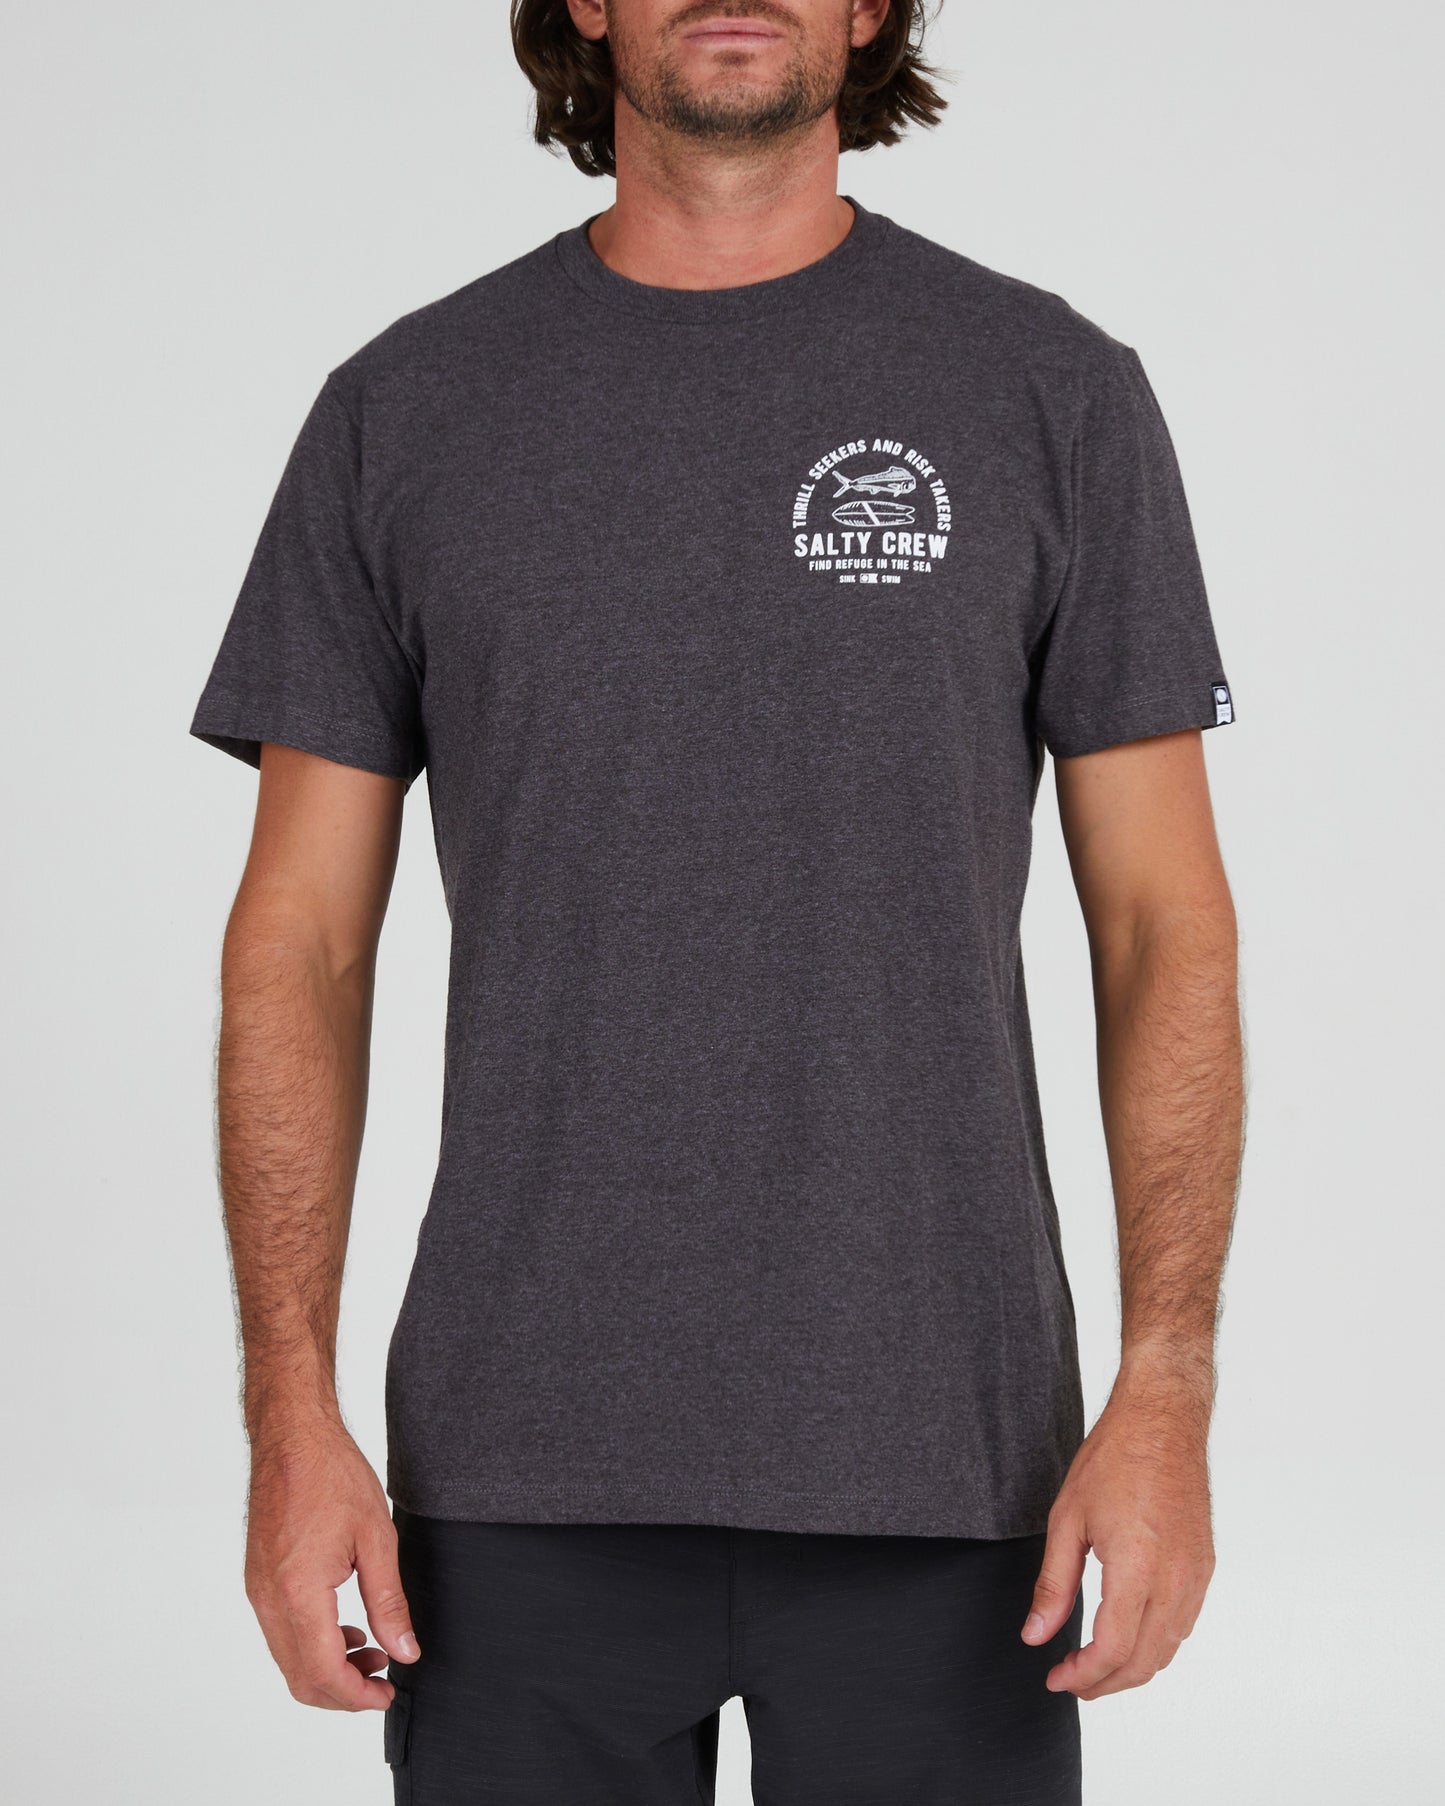 On body front of the Lateral Line Charcoal Heather S/S Standard Tee